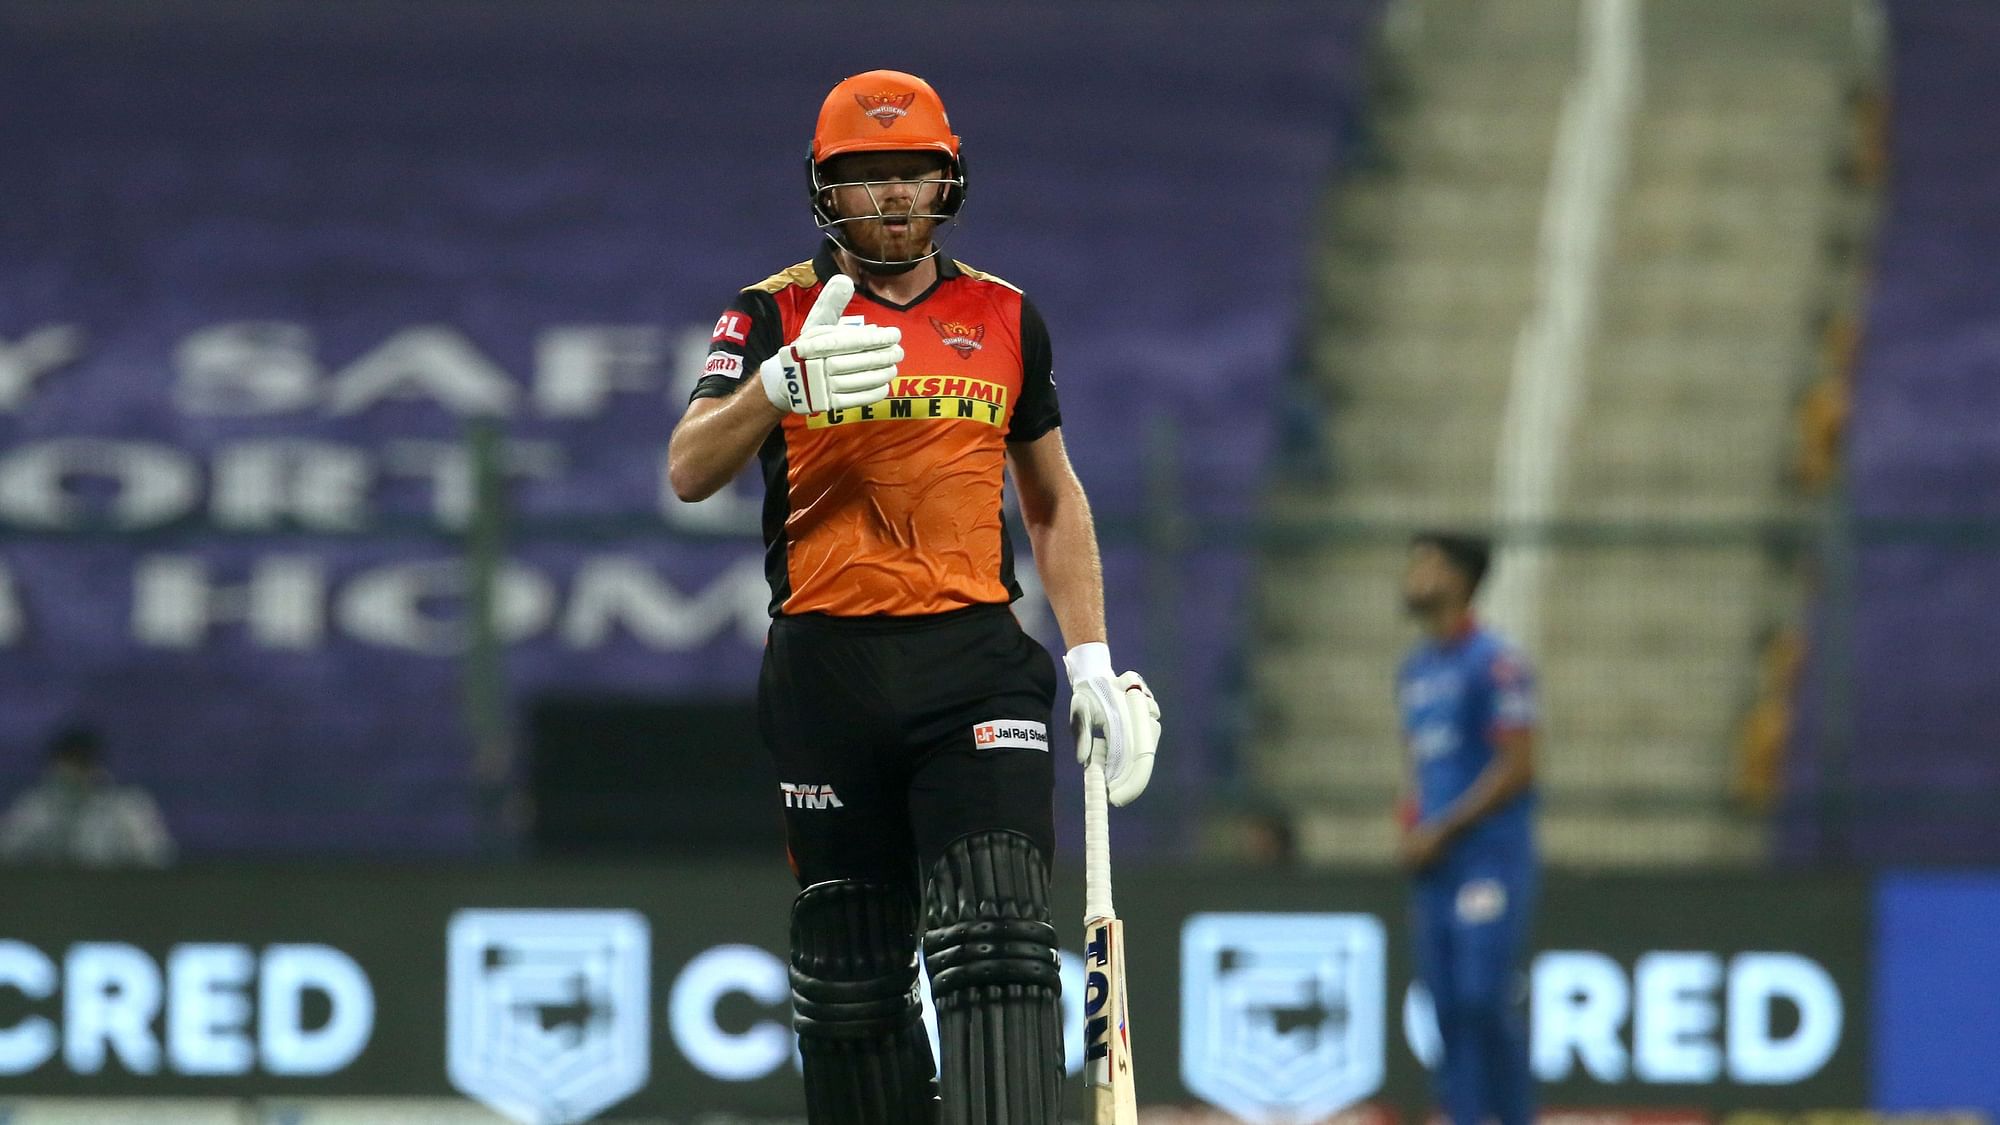 Bairstow scored 53 runs against Delhi and helped Hyderabad win their first game in IPL 2020.